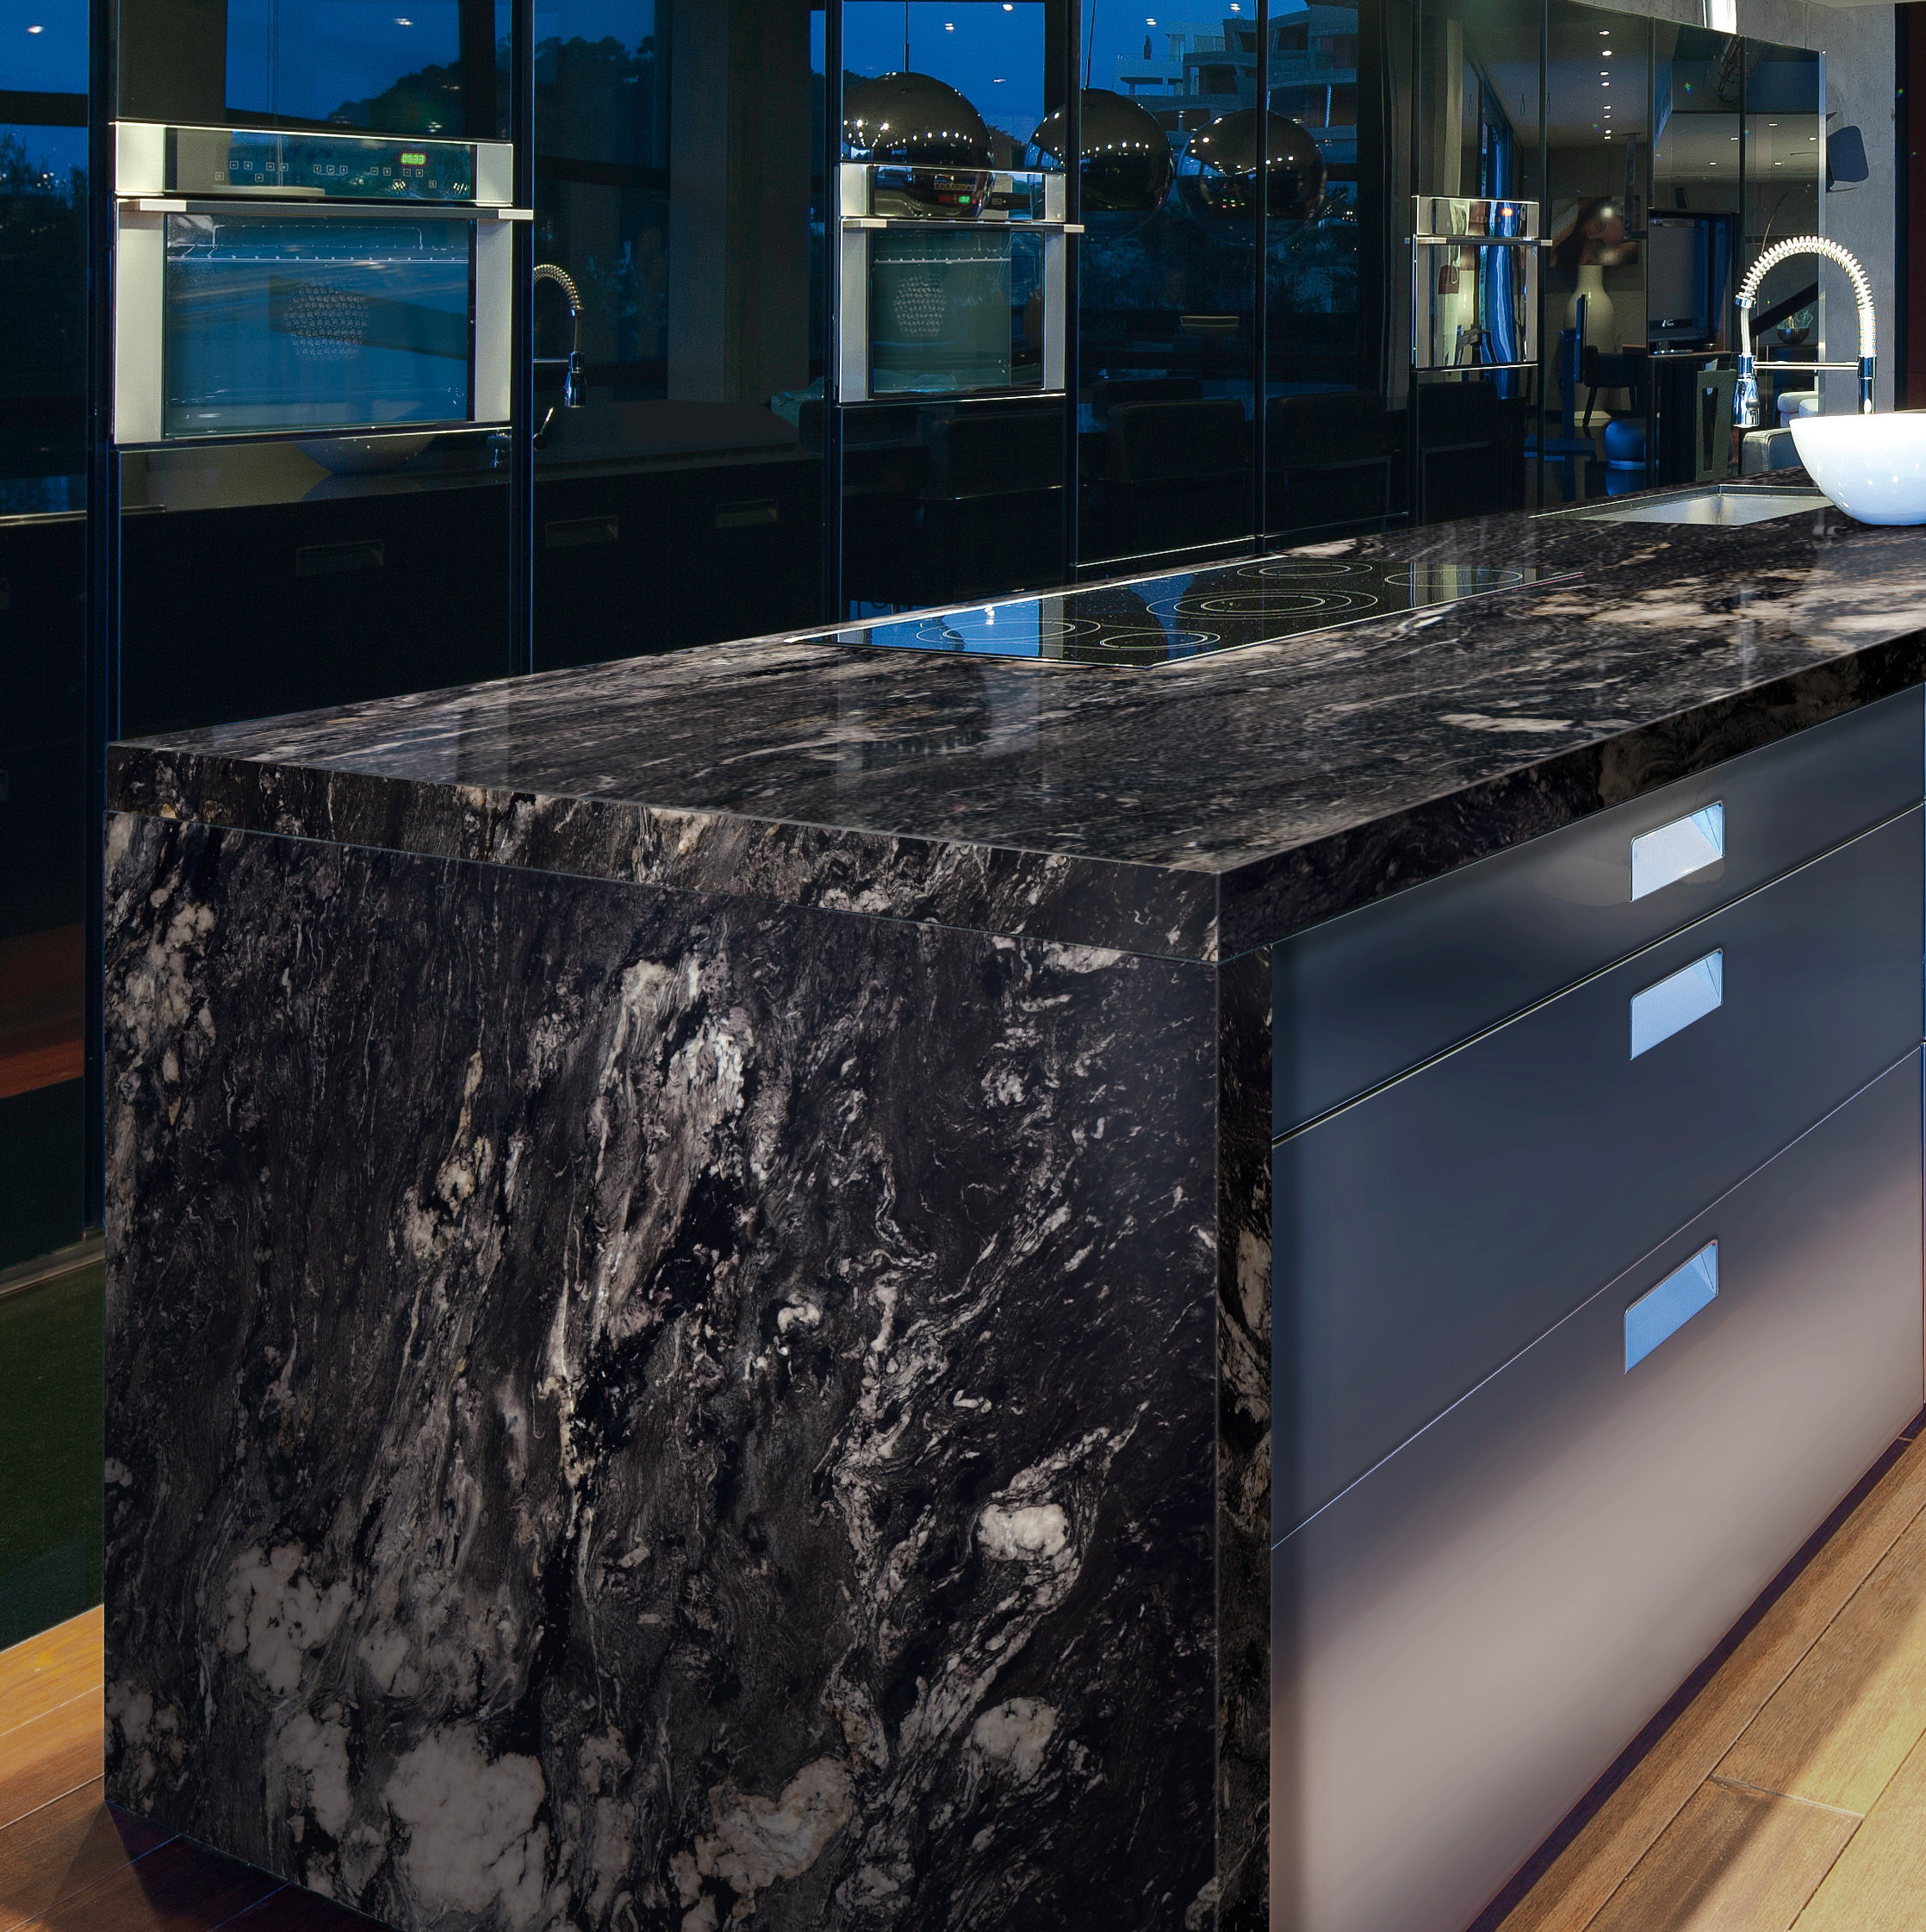 Albums 105+ Images pictures of black granite countertops Latest